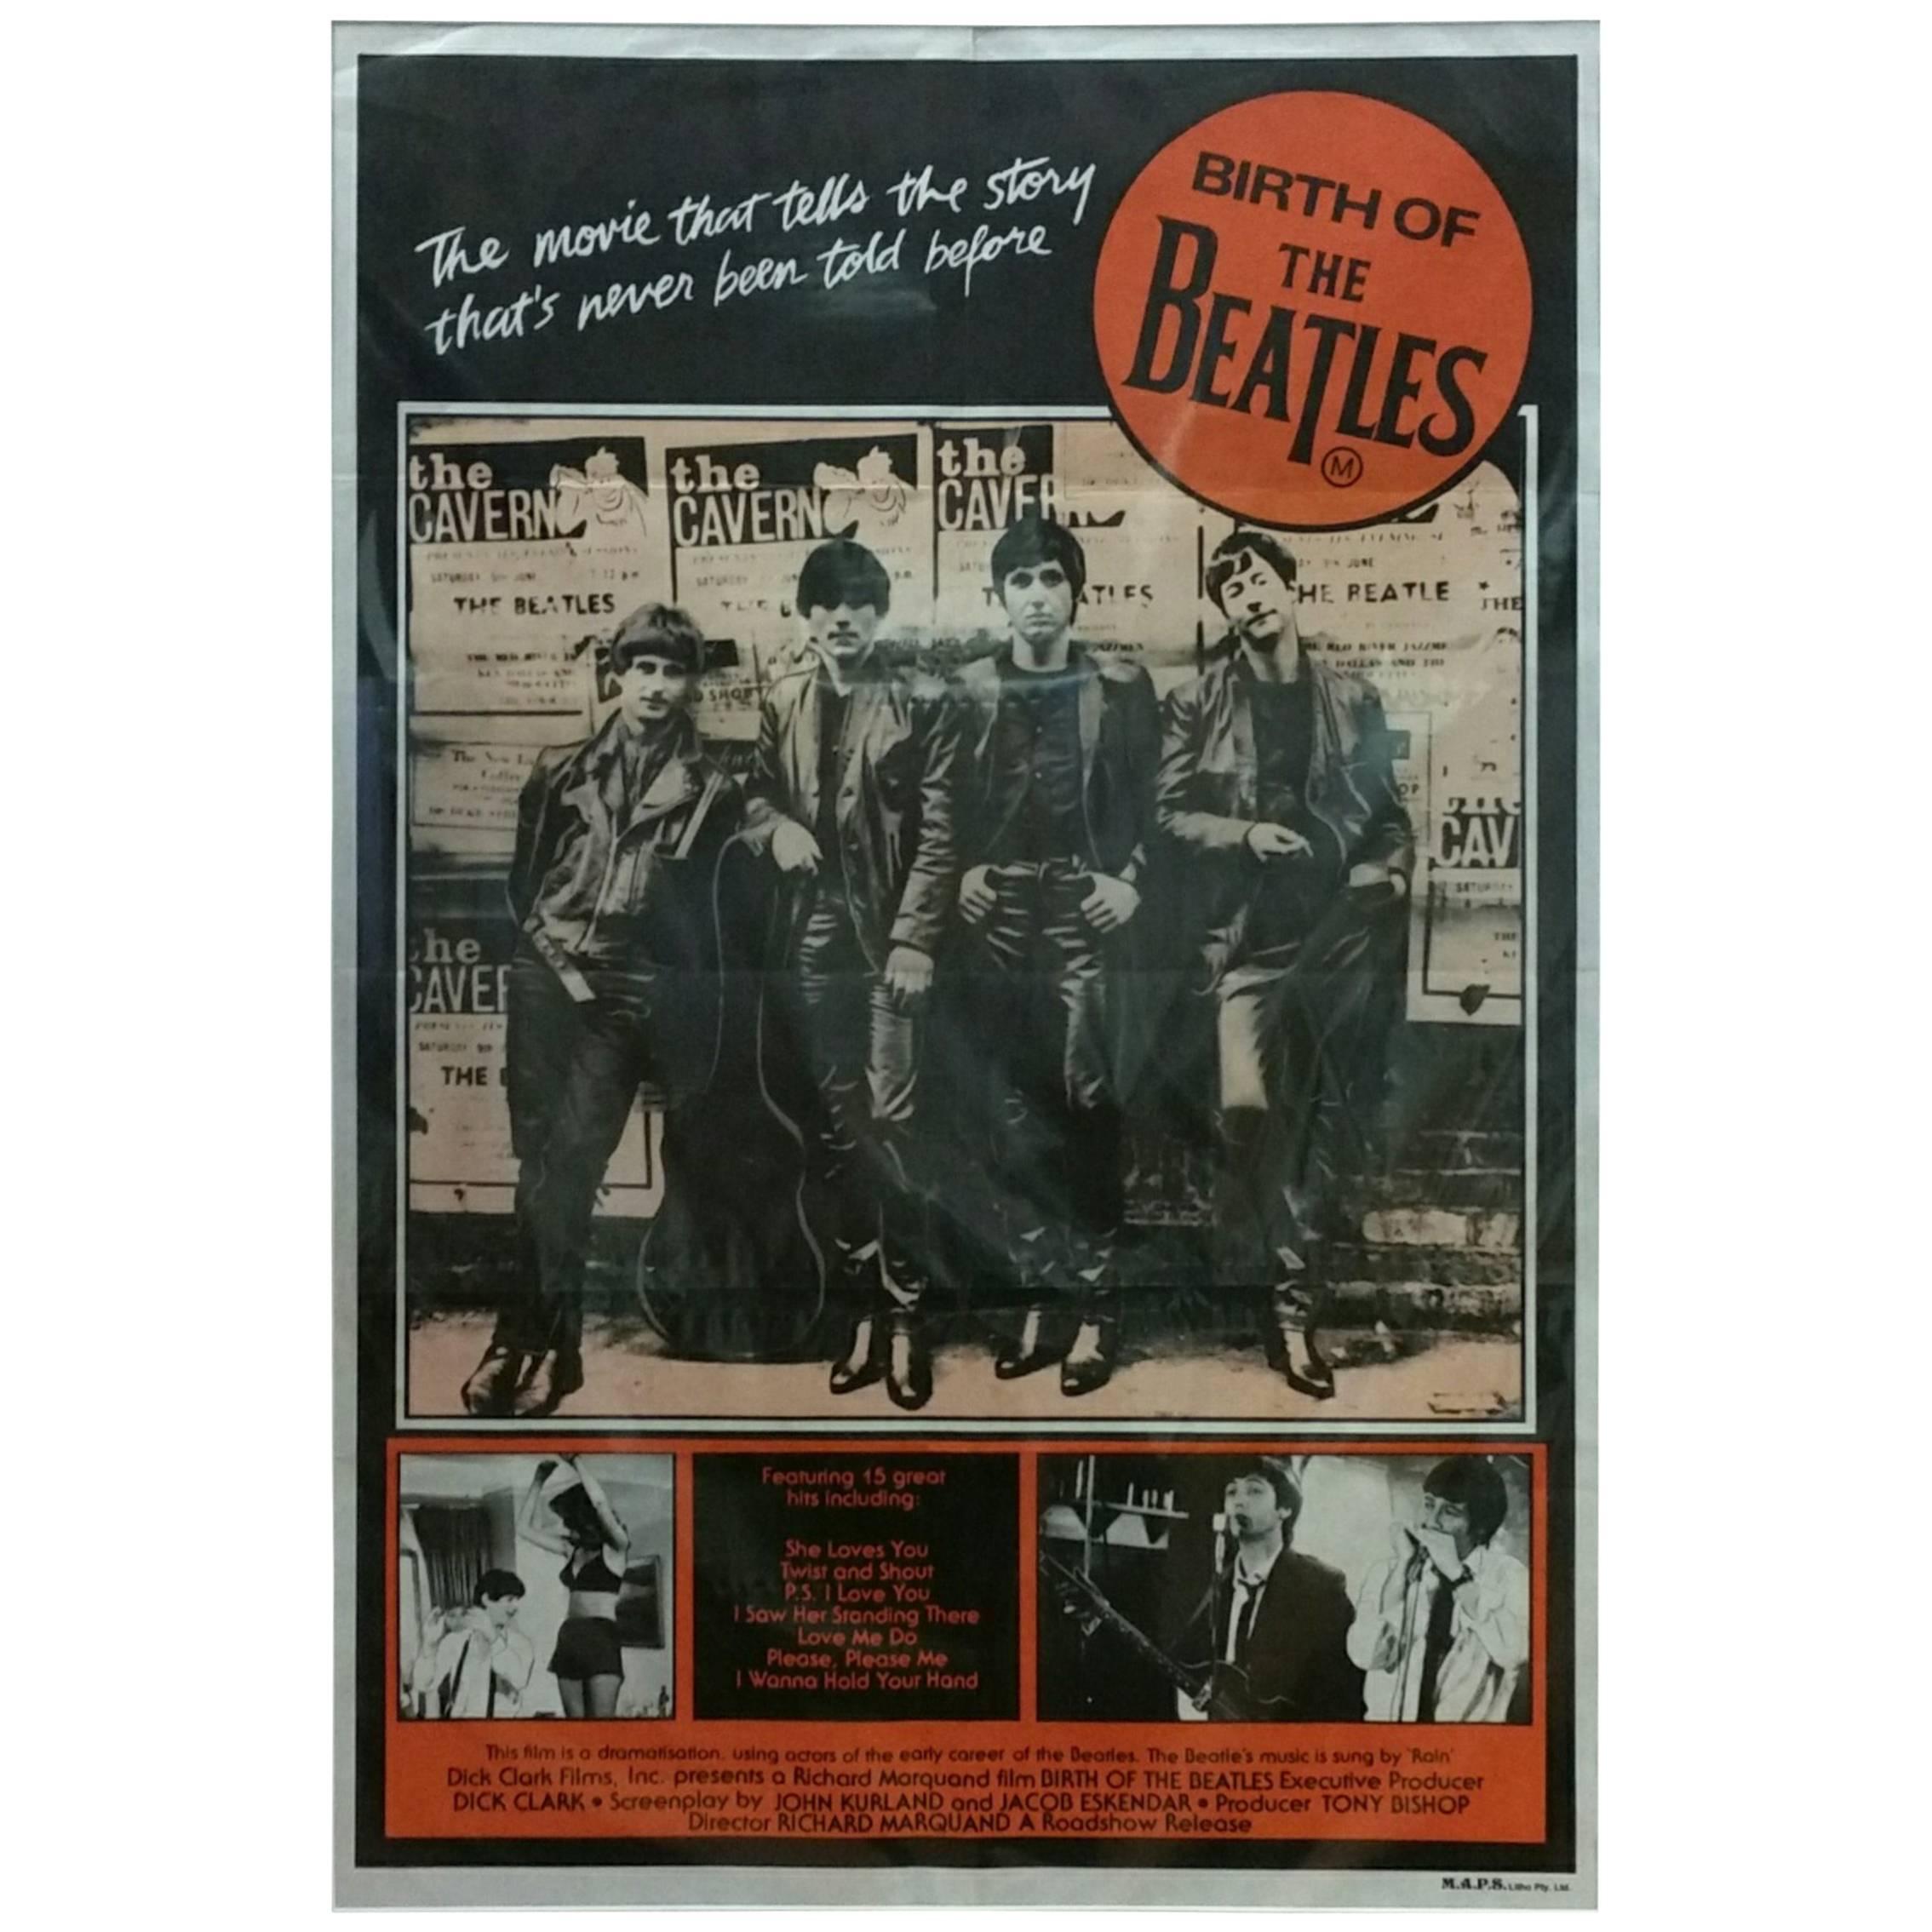 1979 Original Birth of the Beatles Movie Poster For Sale